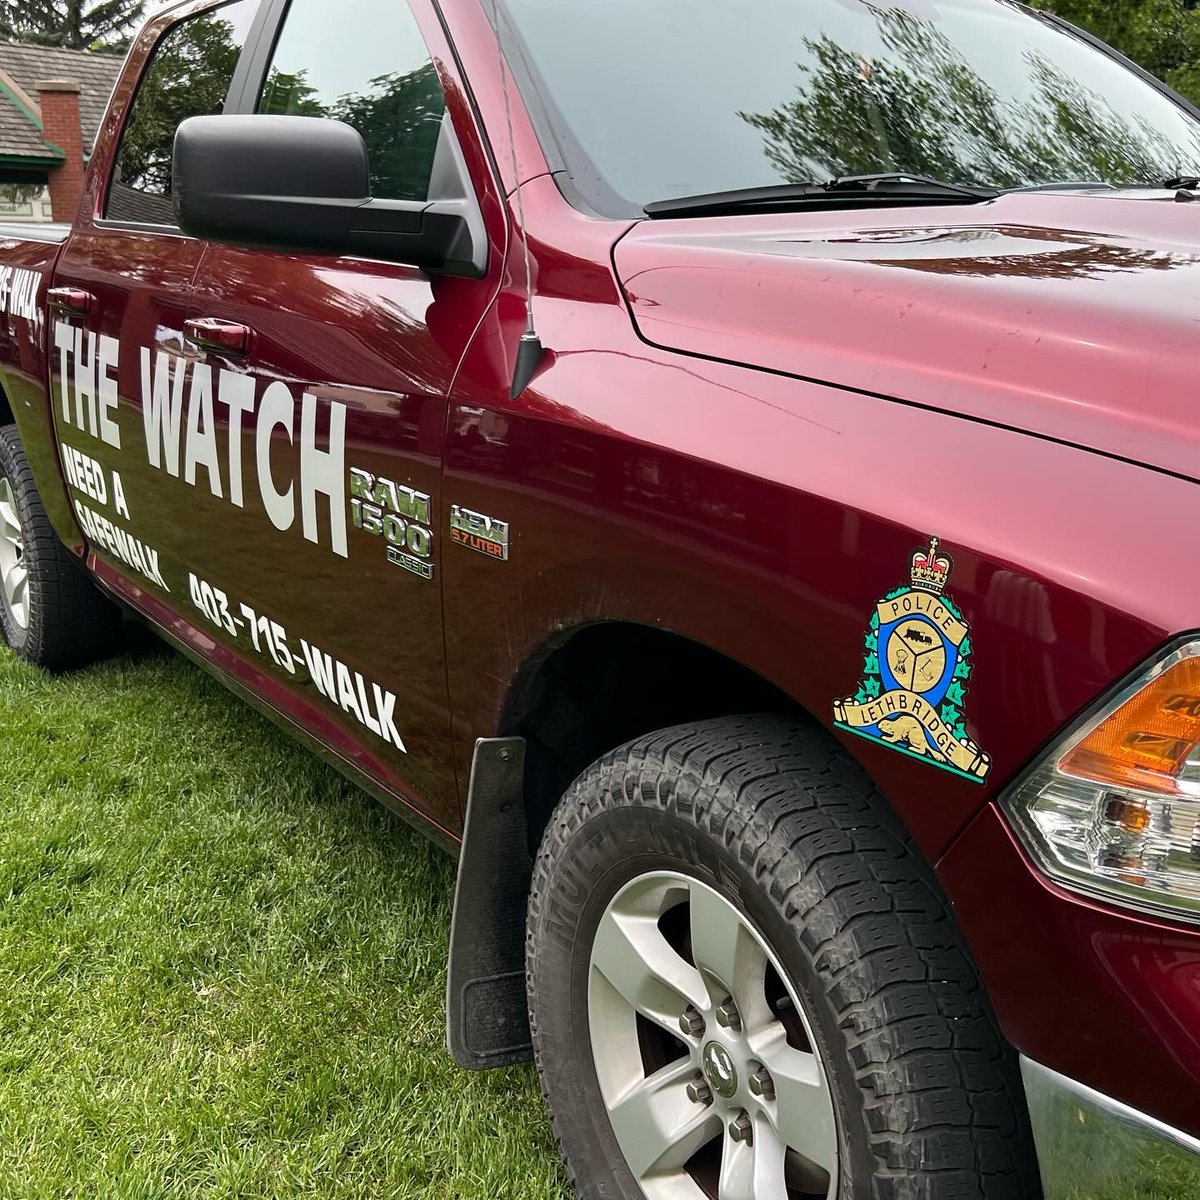 To celebrate five years of service and the many strong relationships forged with people from all walks of life, The Watch hosted a BBQ today at Galt Gardens for those living and working downtown who are most frequently in contact with the team. @TheWatchLPS #yql